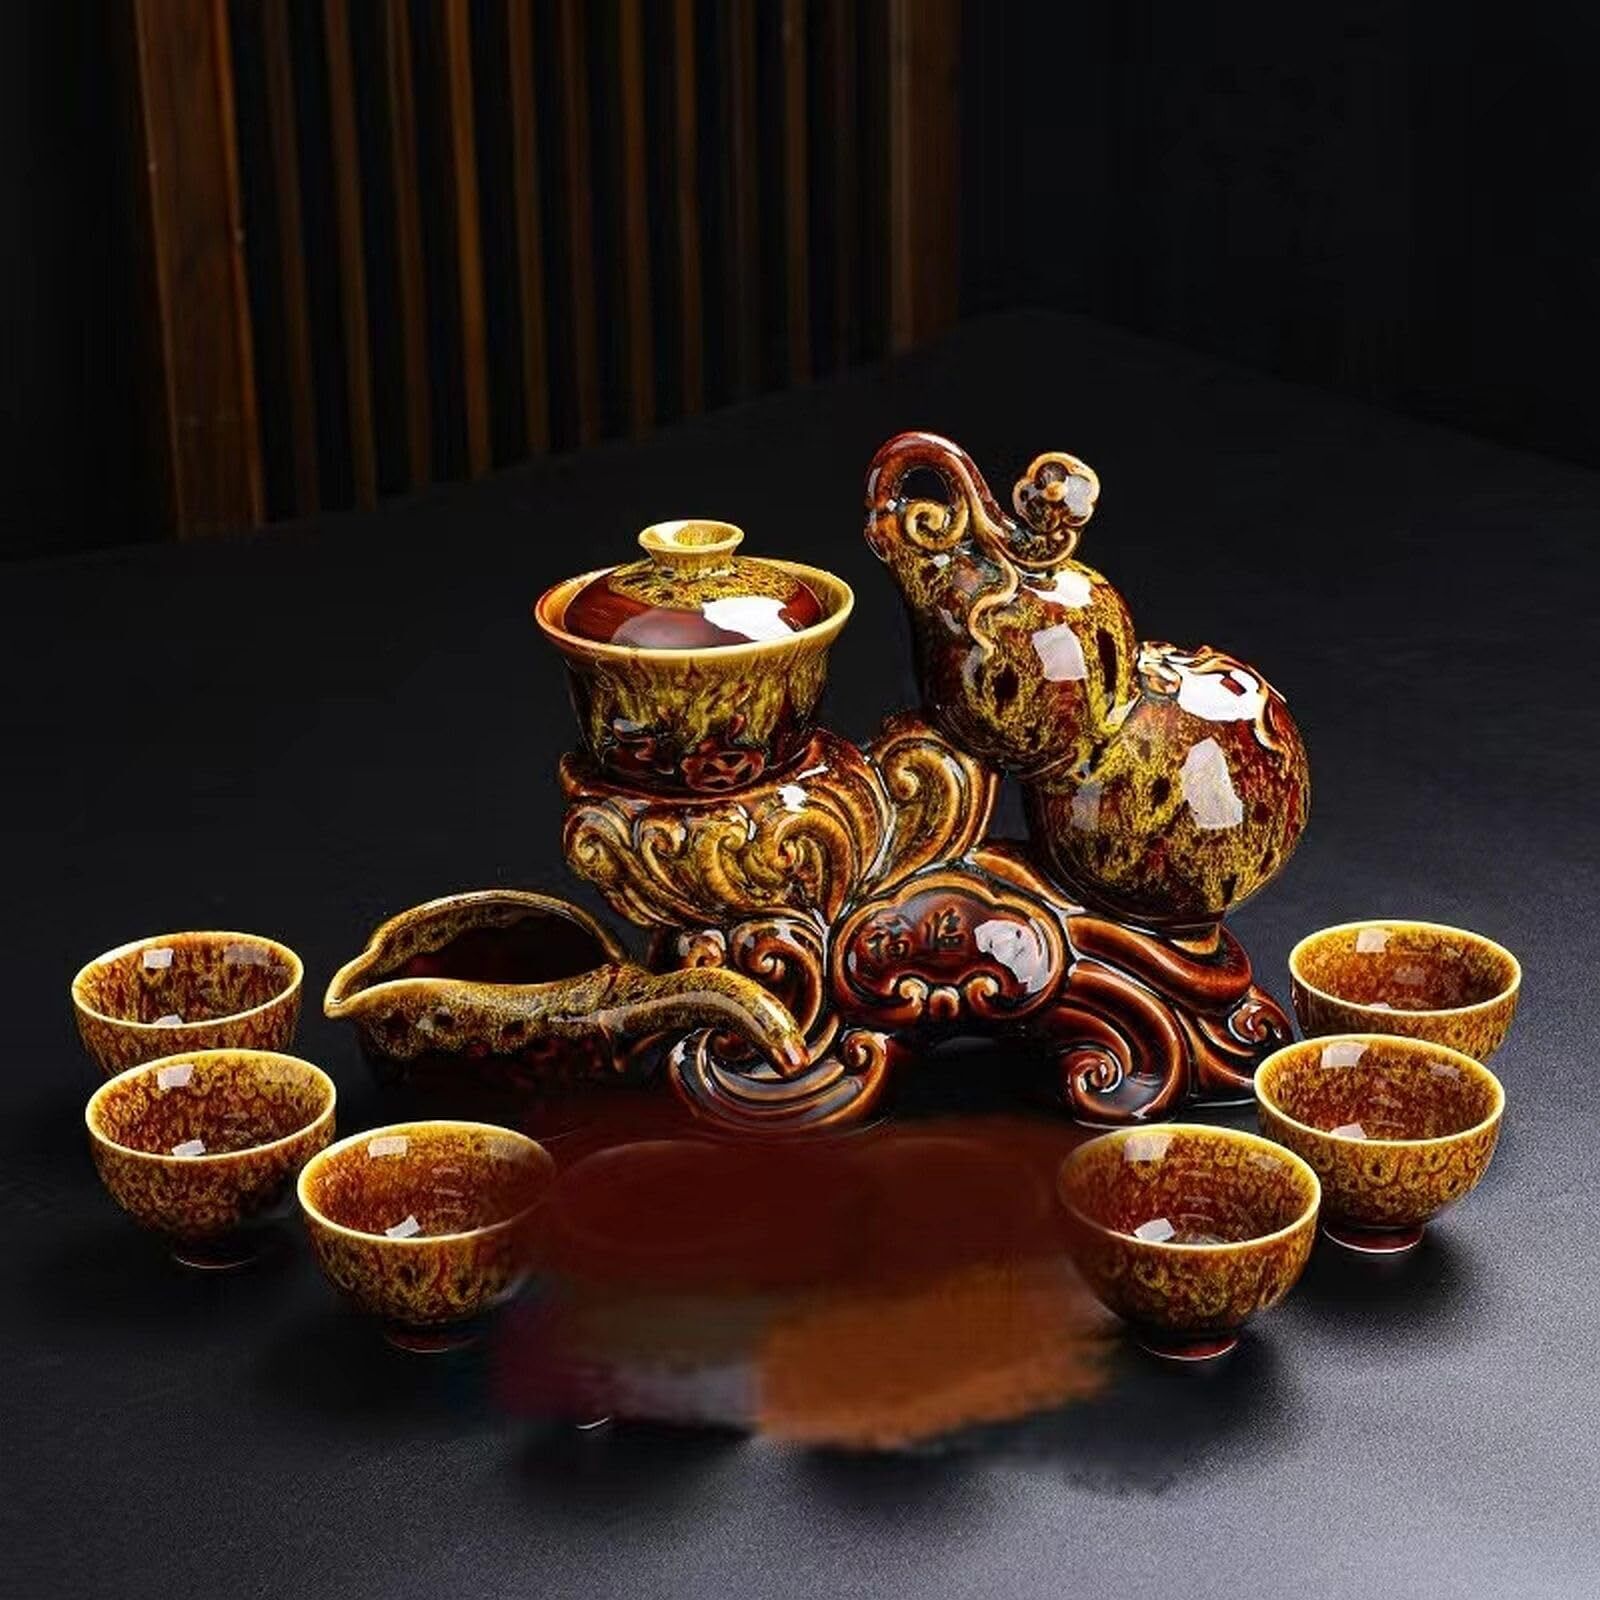 Chinese Kung Fu Tea Set Gift Box, Gourd Shaped, Suitable as A Gift for Birthd...